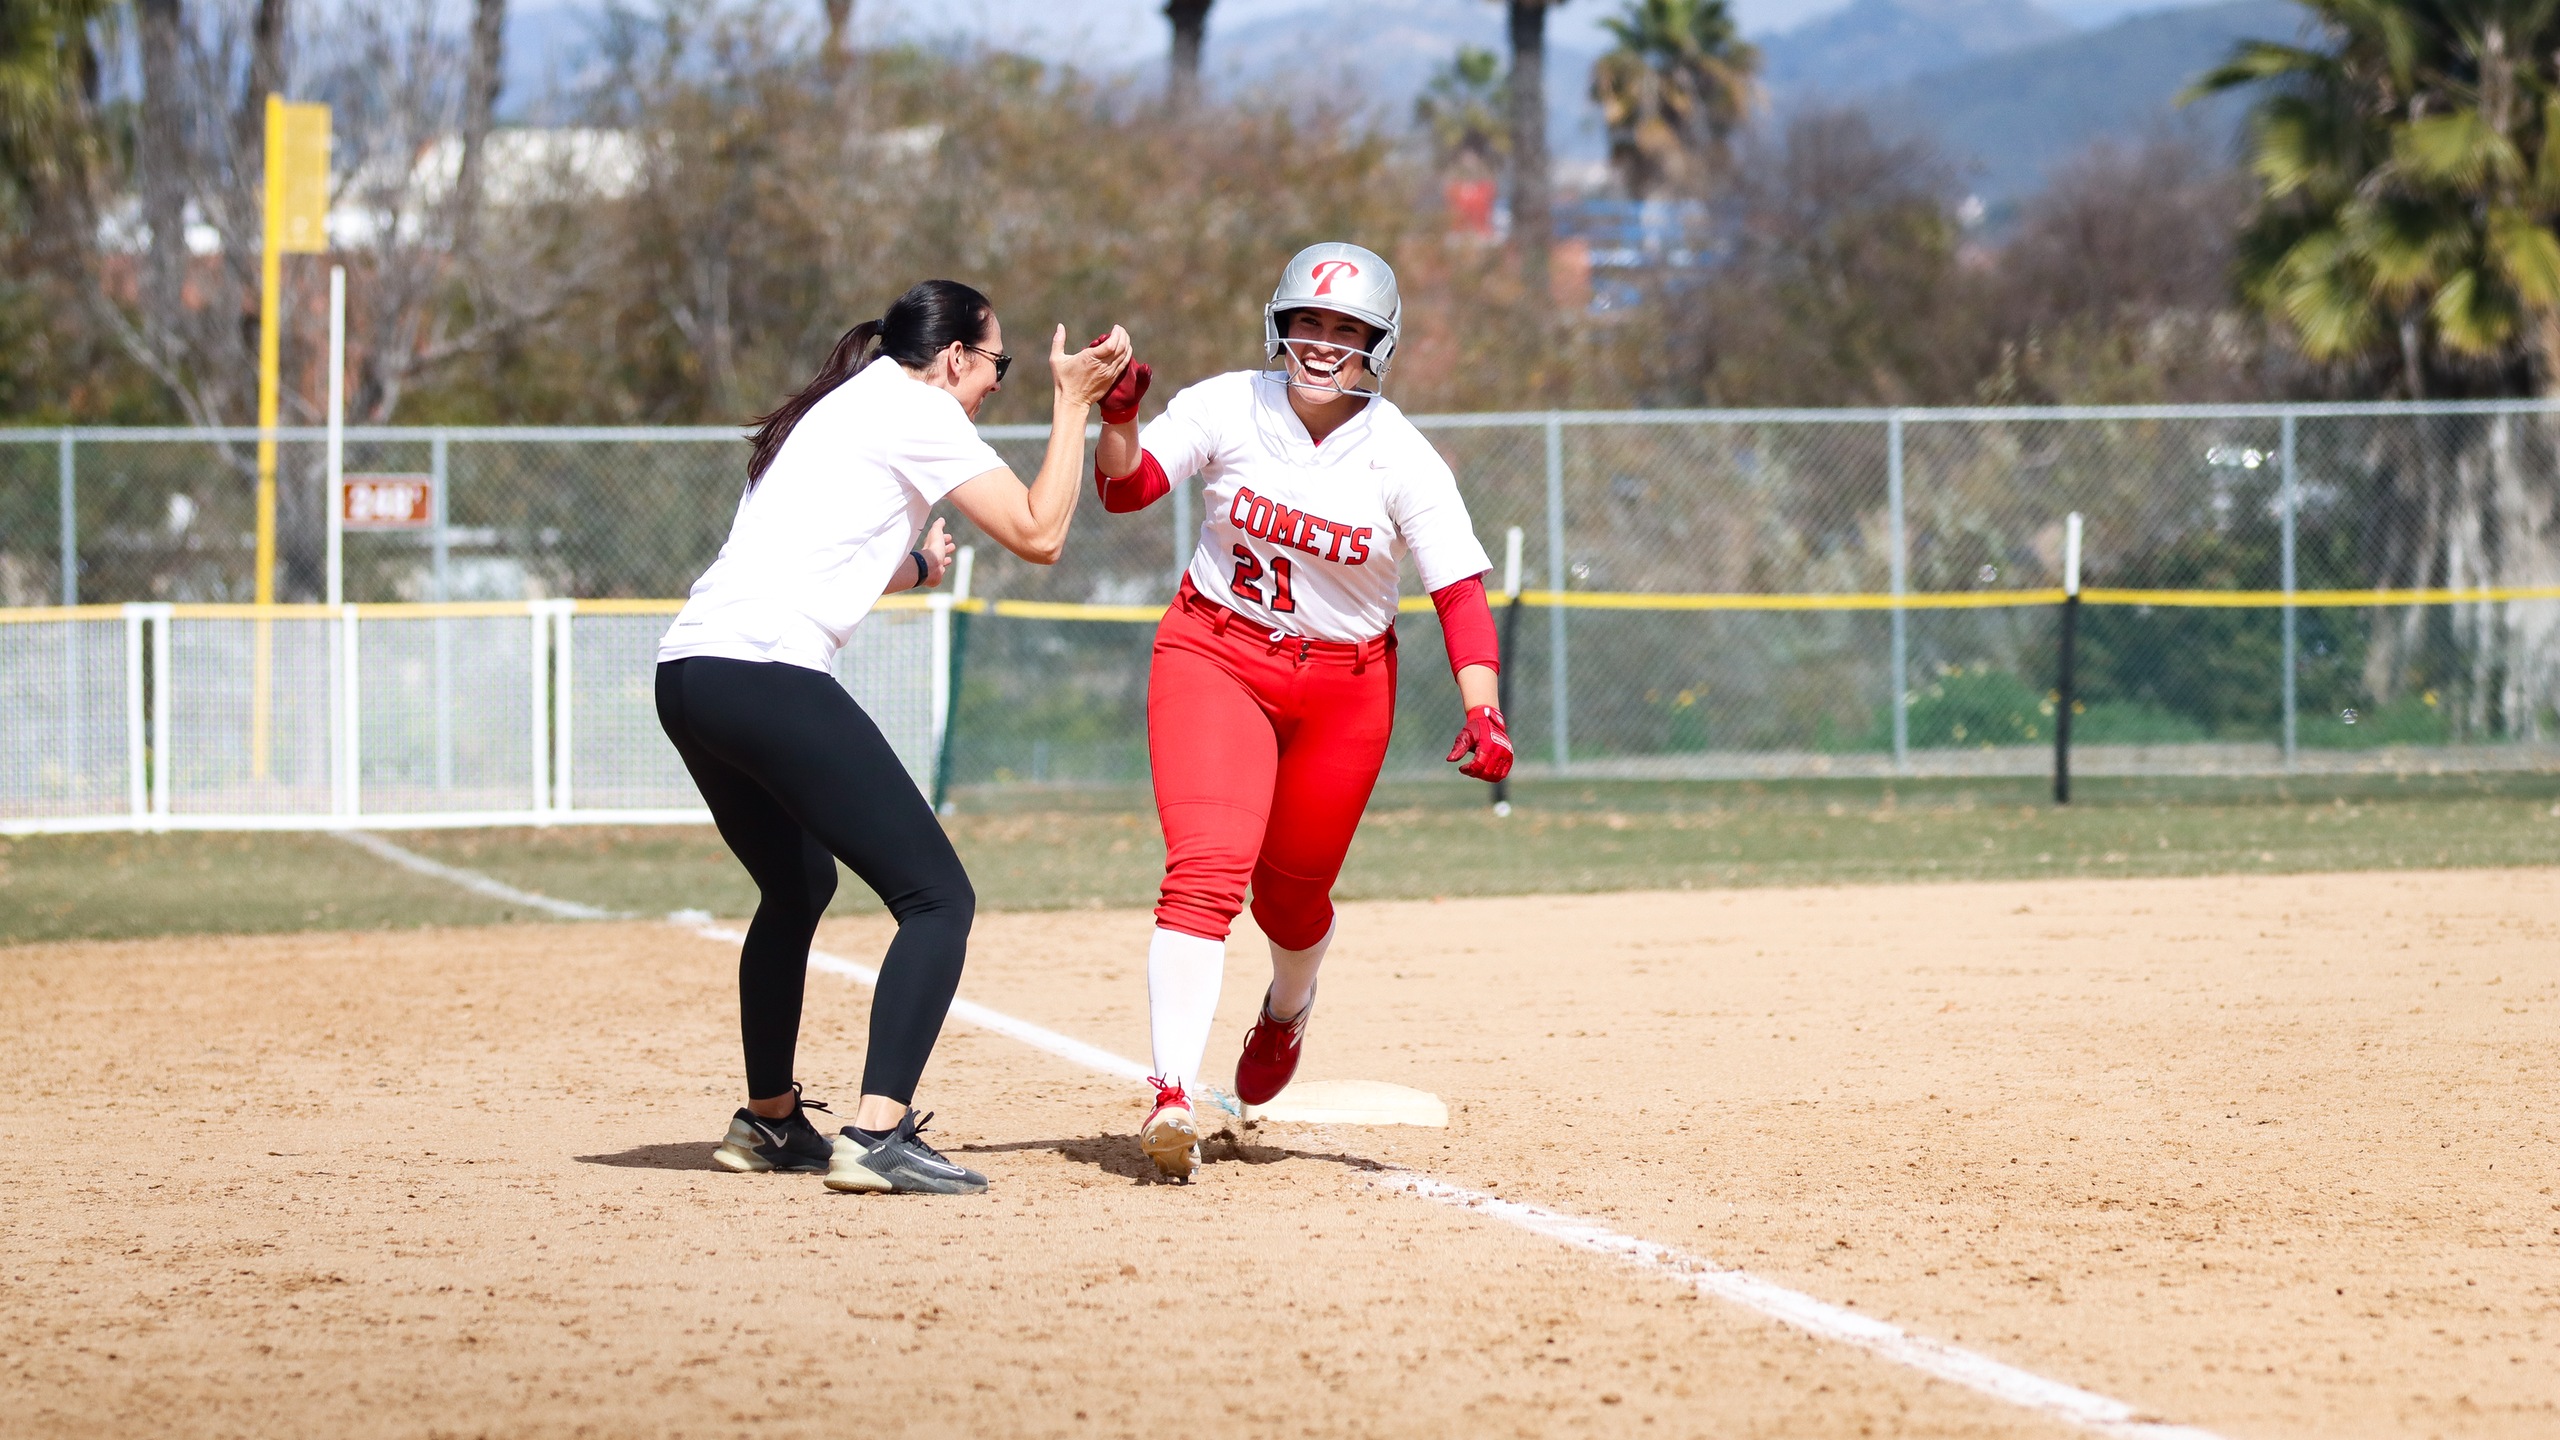 Breanna Lutz hit her first home run of the season in game one and hit another one in game two. Photo by Cara Heise.